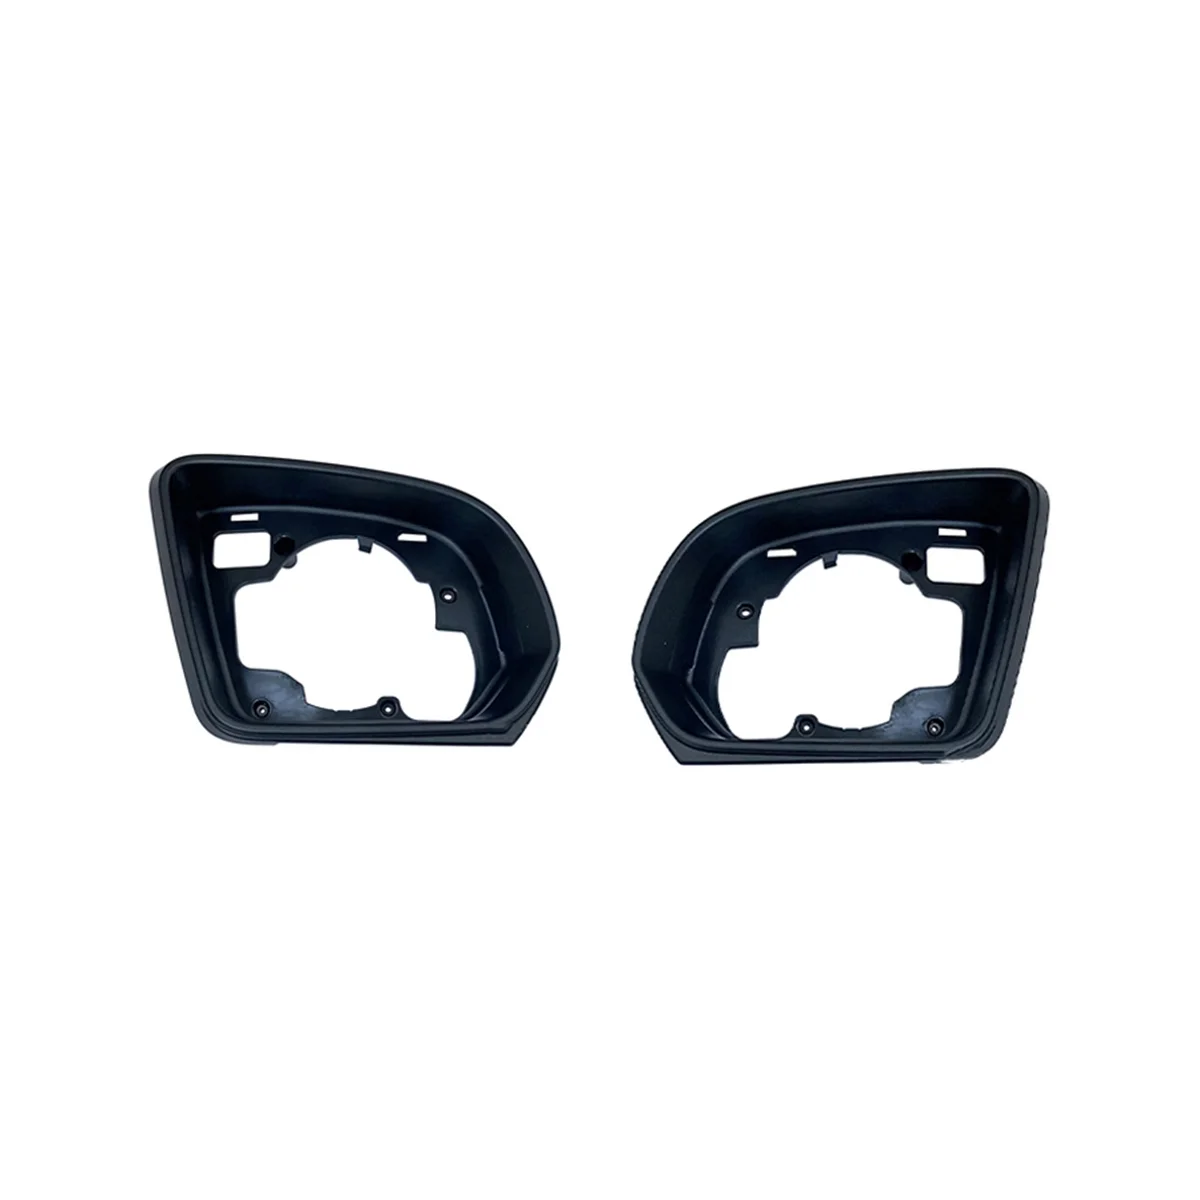 

Car Side Mirror Frame Holder for Mercedes-Benz Vito W447 2016-2021 Rearview Glass Surround Housing Trim